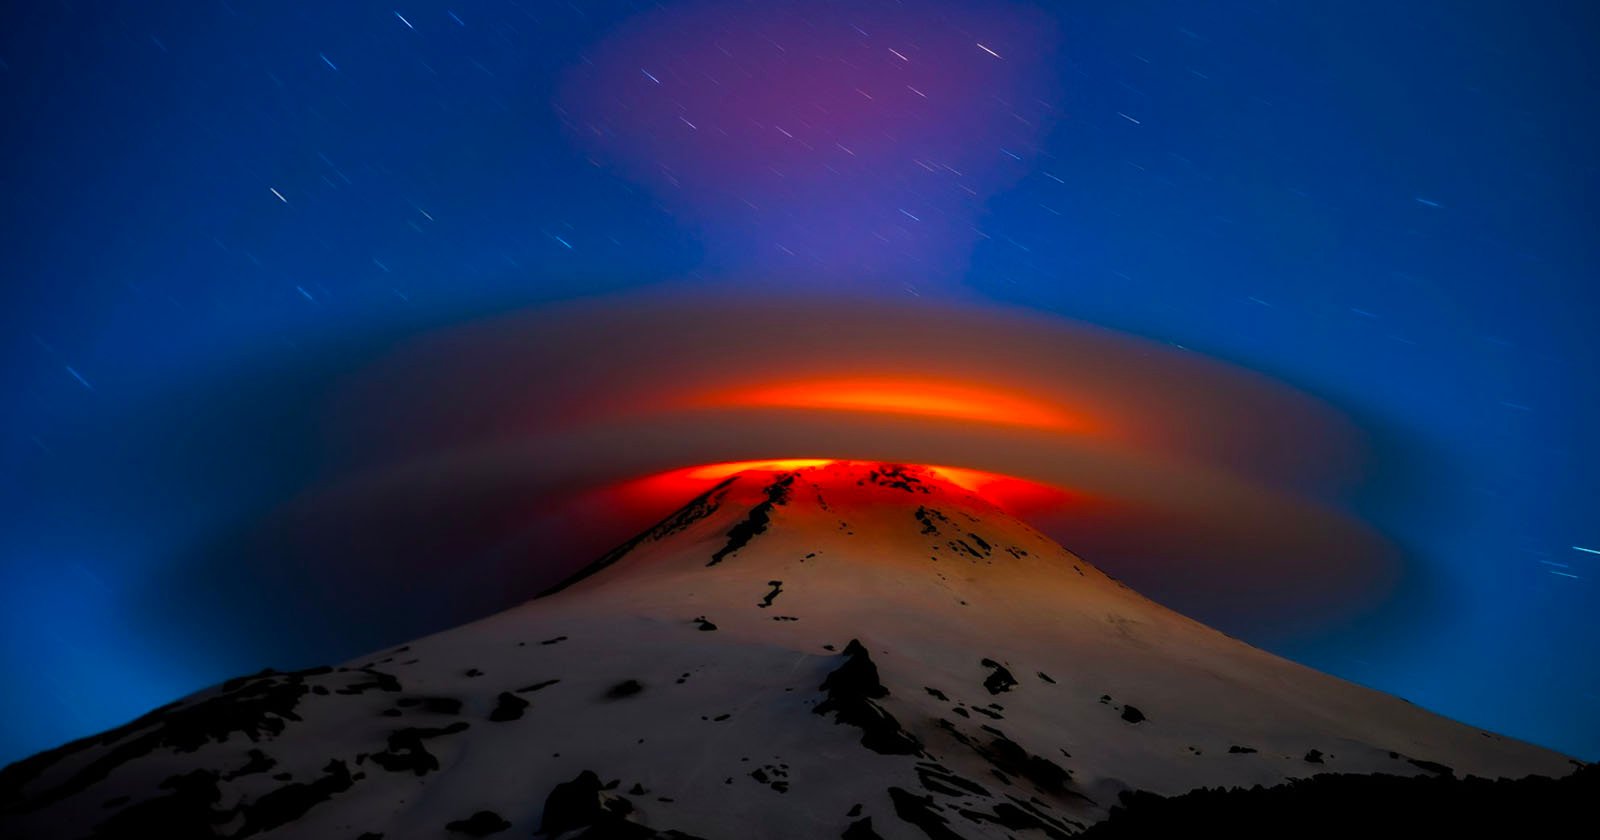 Photo of a Volcano Glowing Inside a Cloud Wins Weather Photographer of the Year